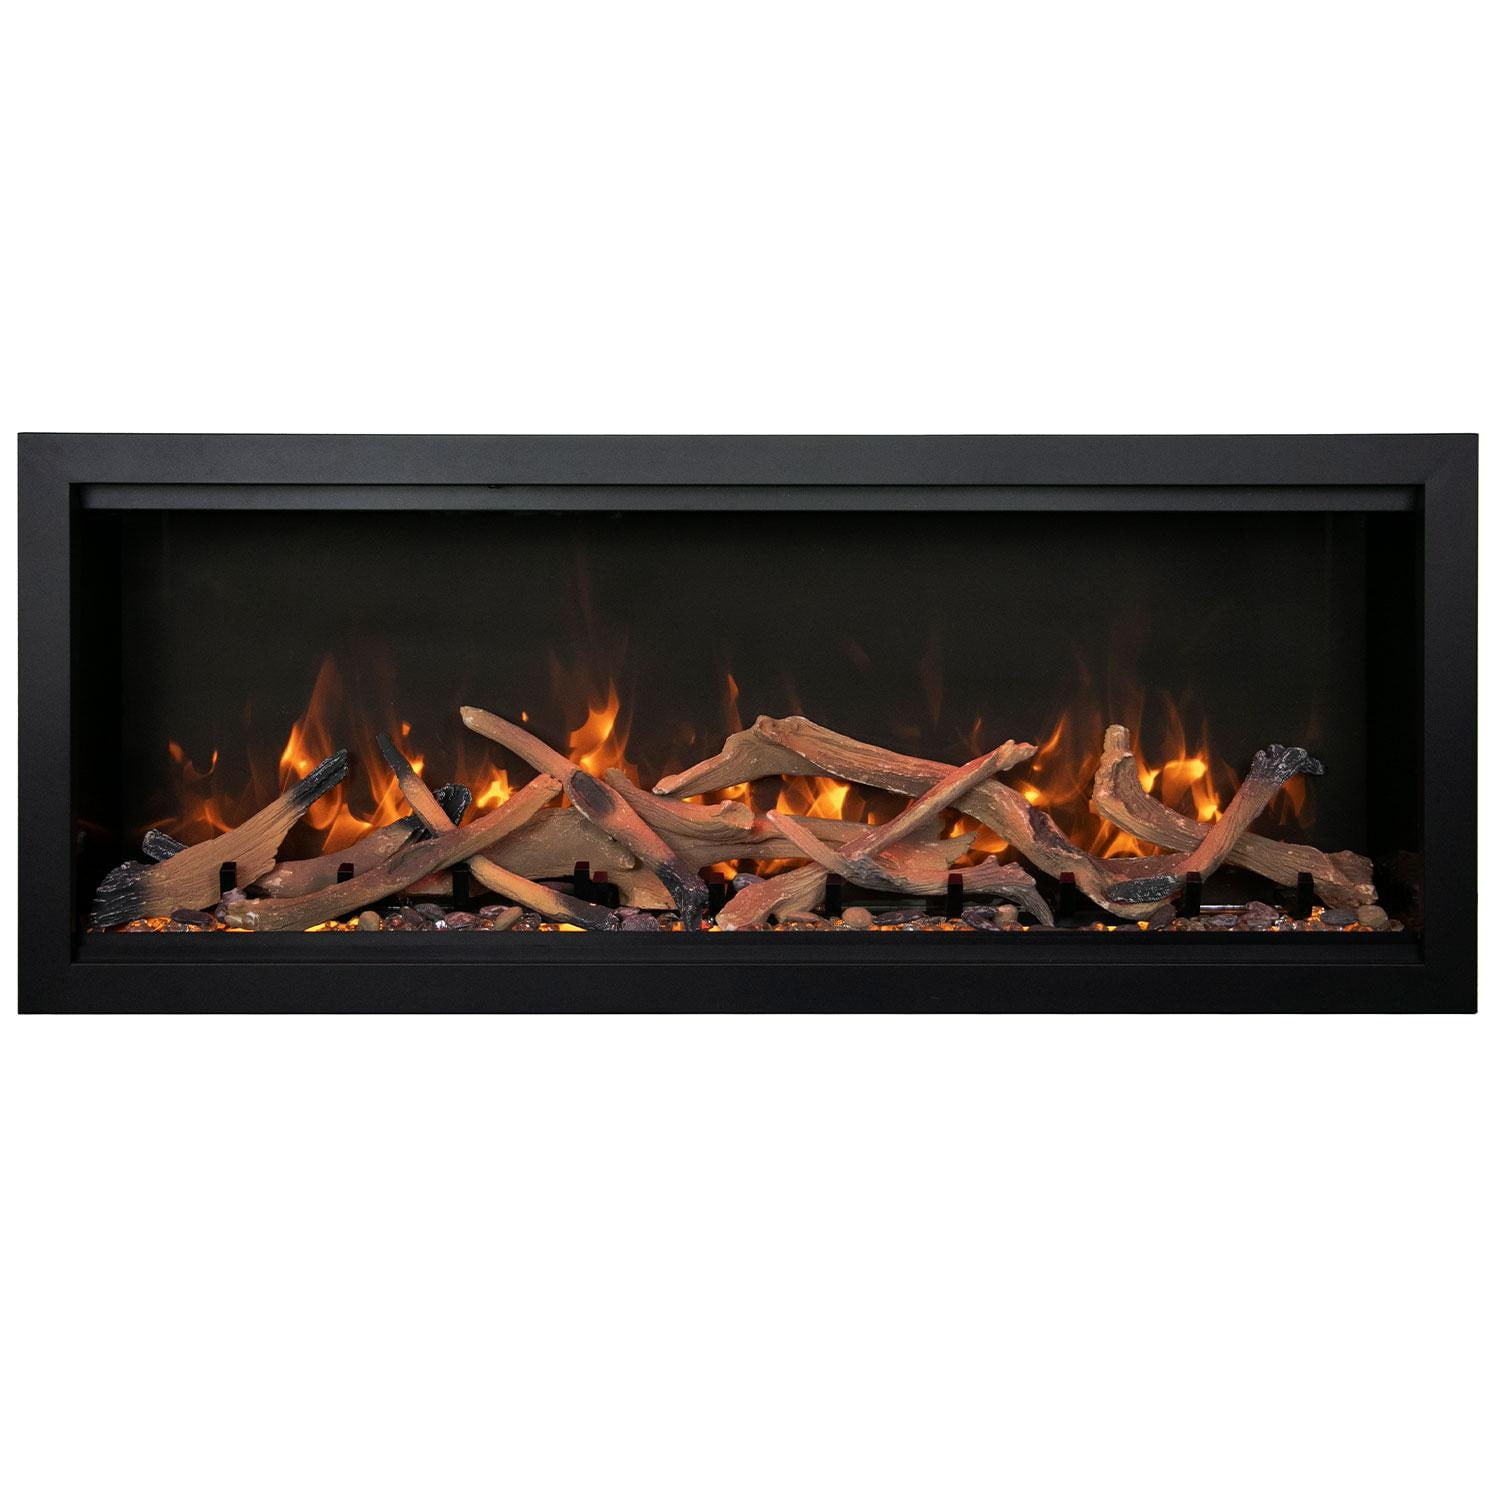 Picture of Amantii SYM-74-XT-BESPOKE 74 in. Thermostatic Remote Electric Fireplace with Symmetry Xtra Tall Bespoke